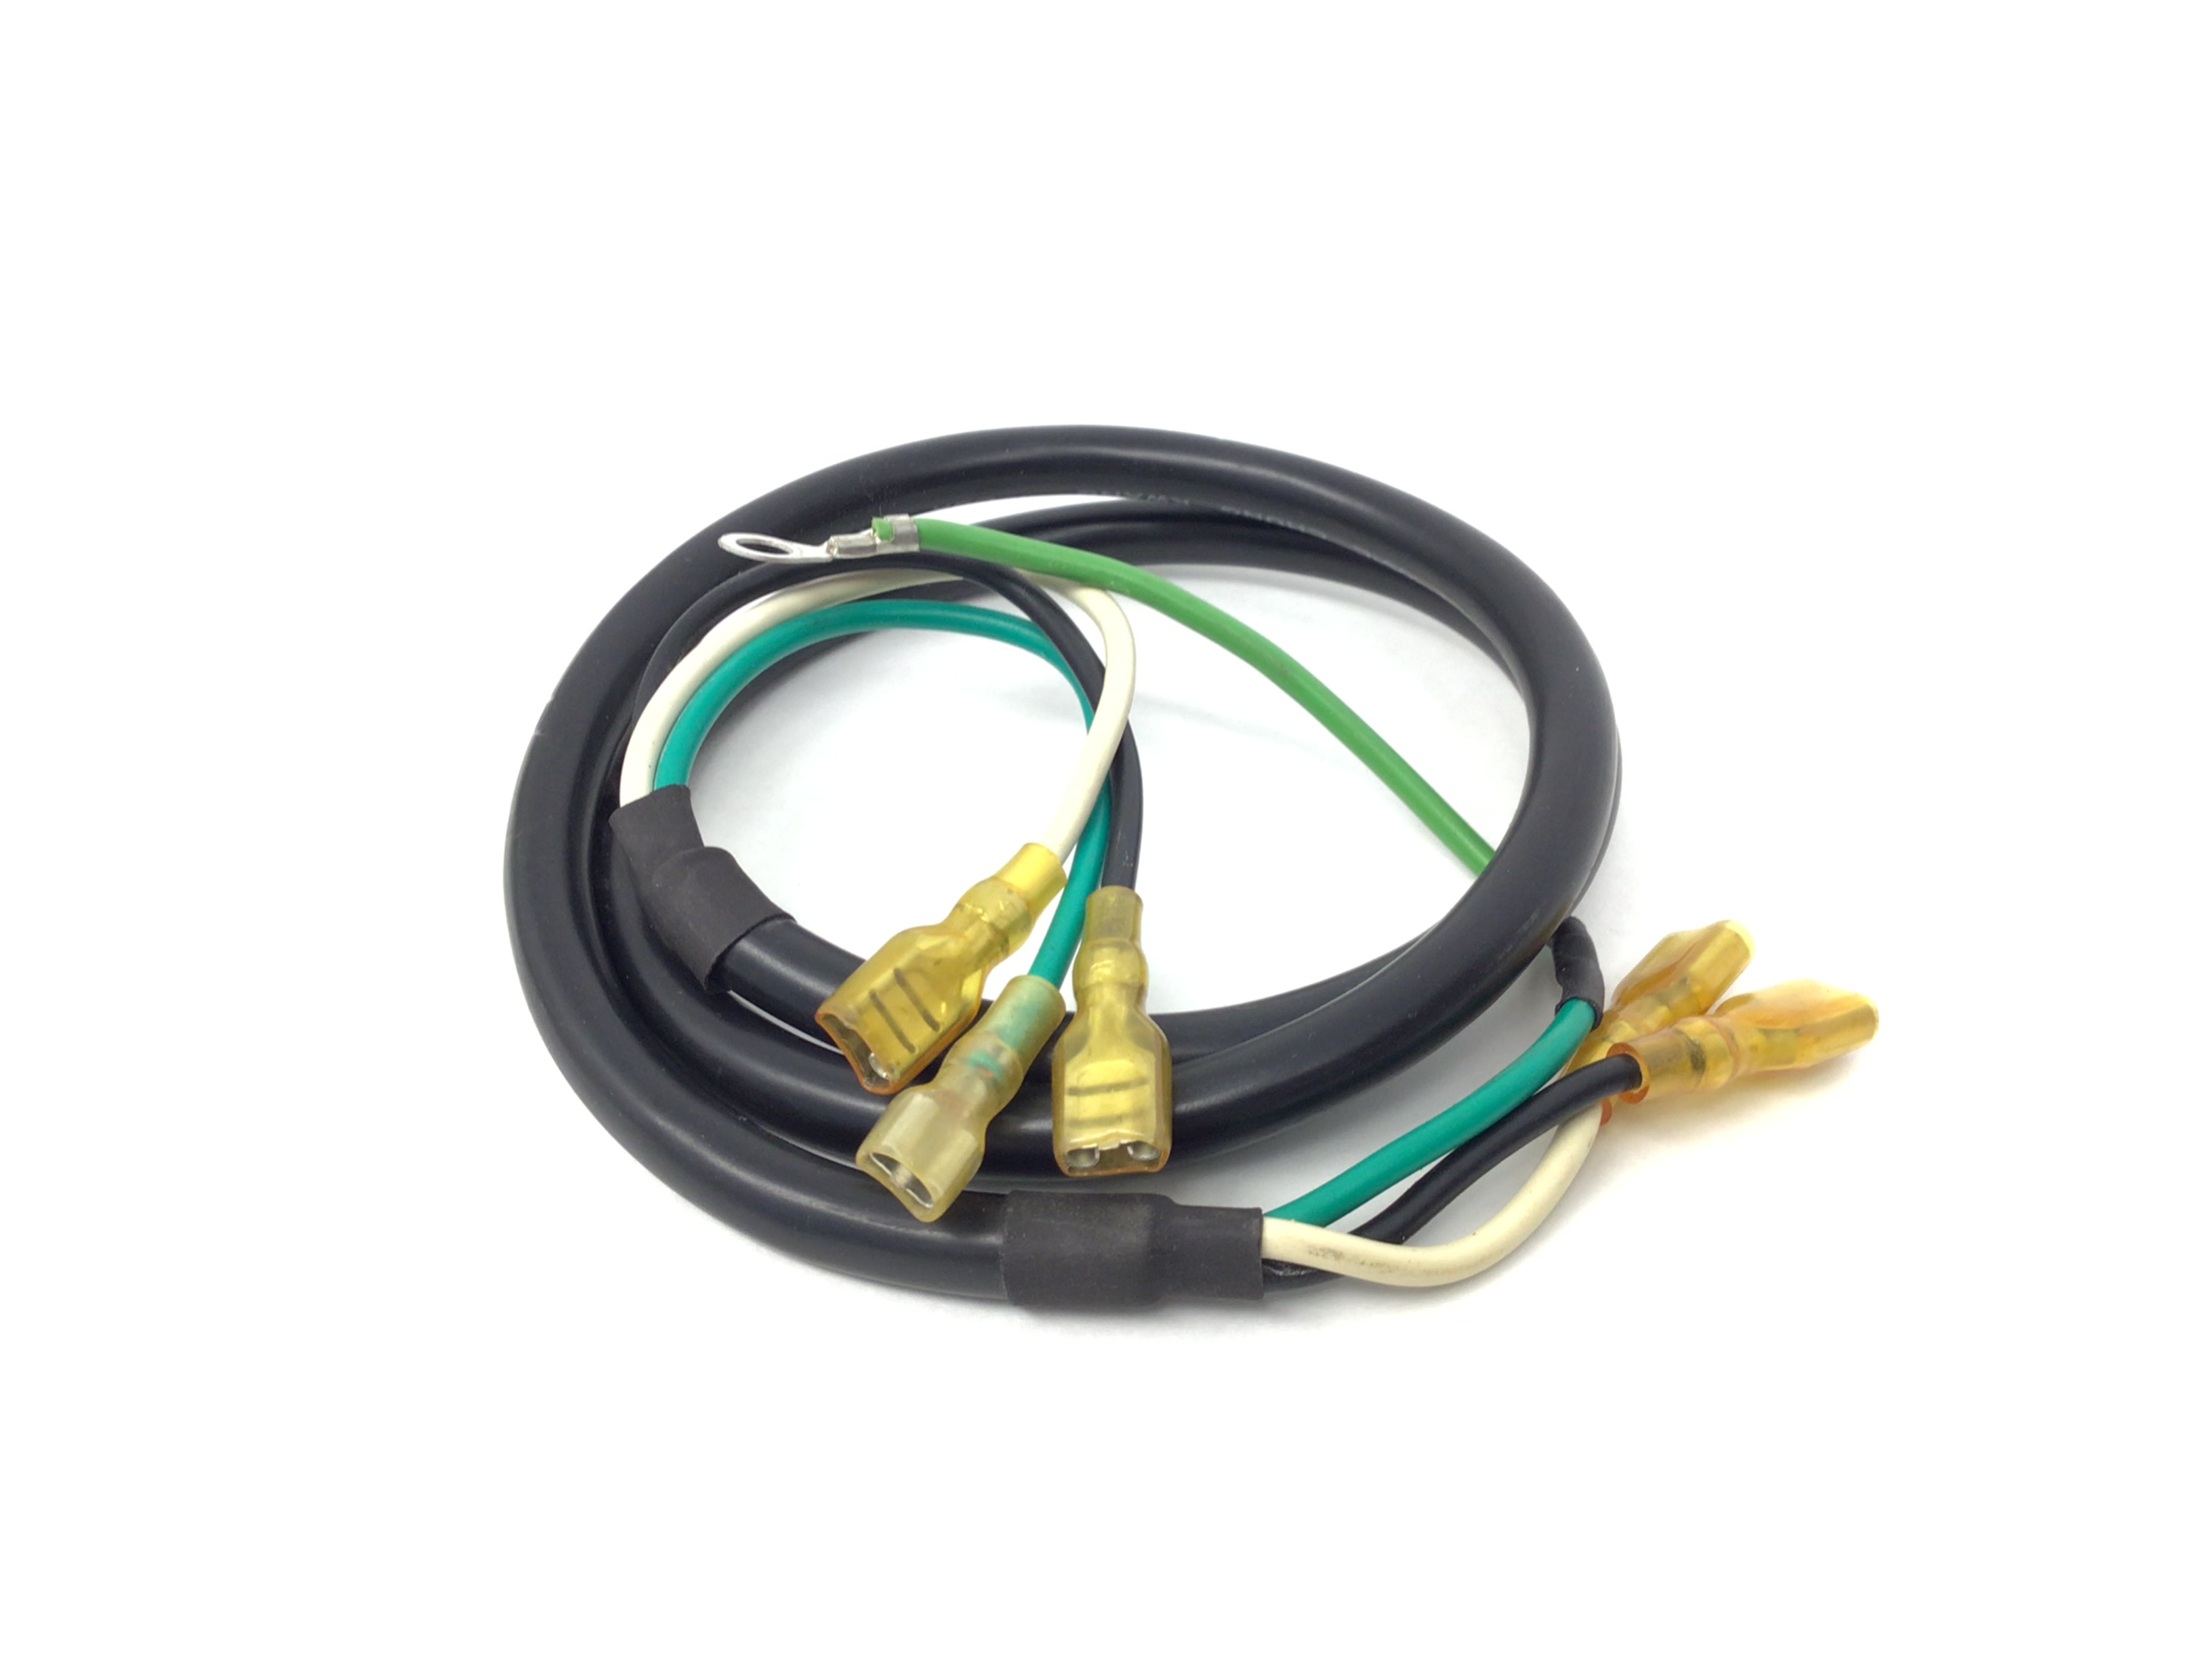 Power Supply: Base Frame Power Cable